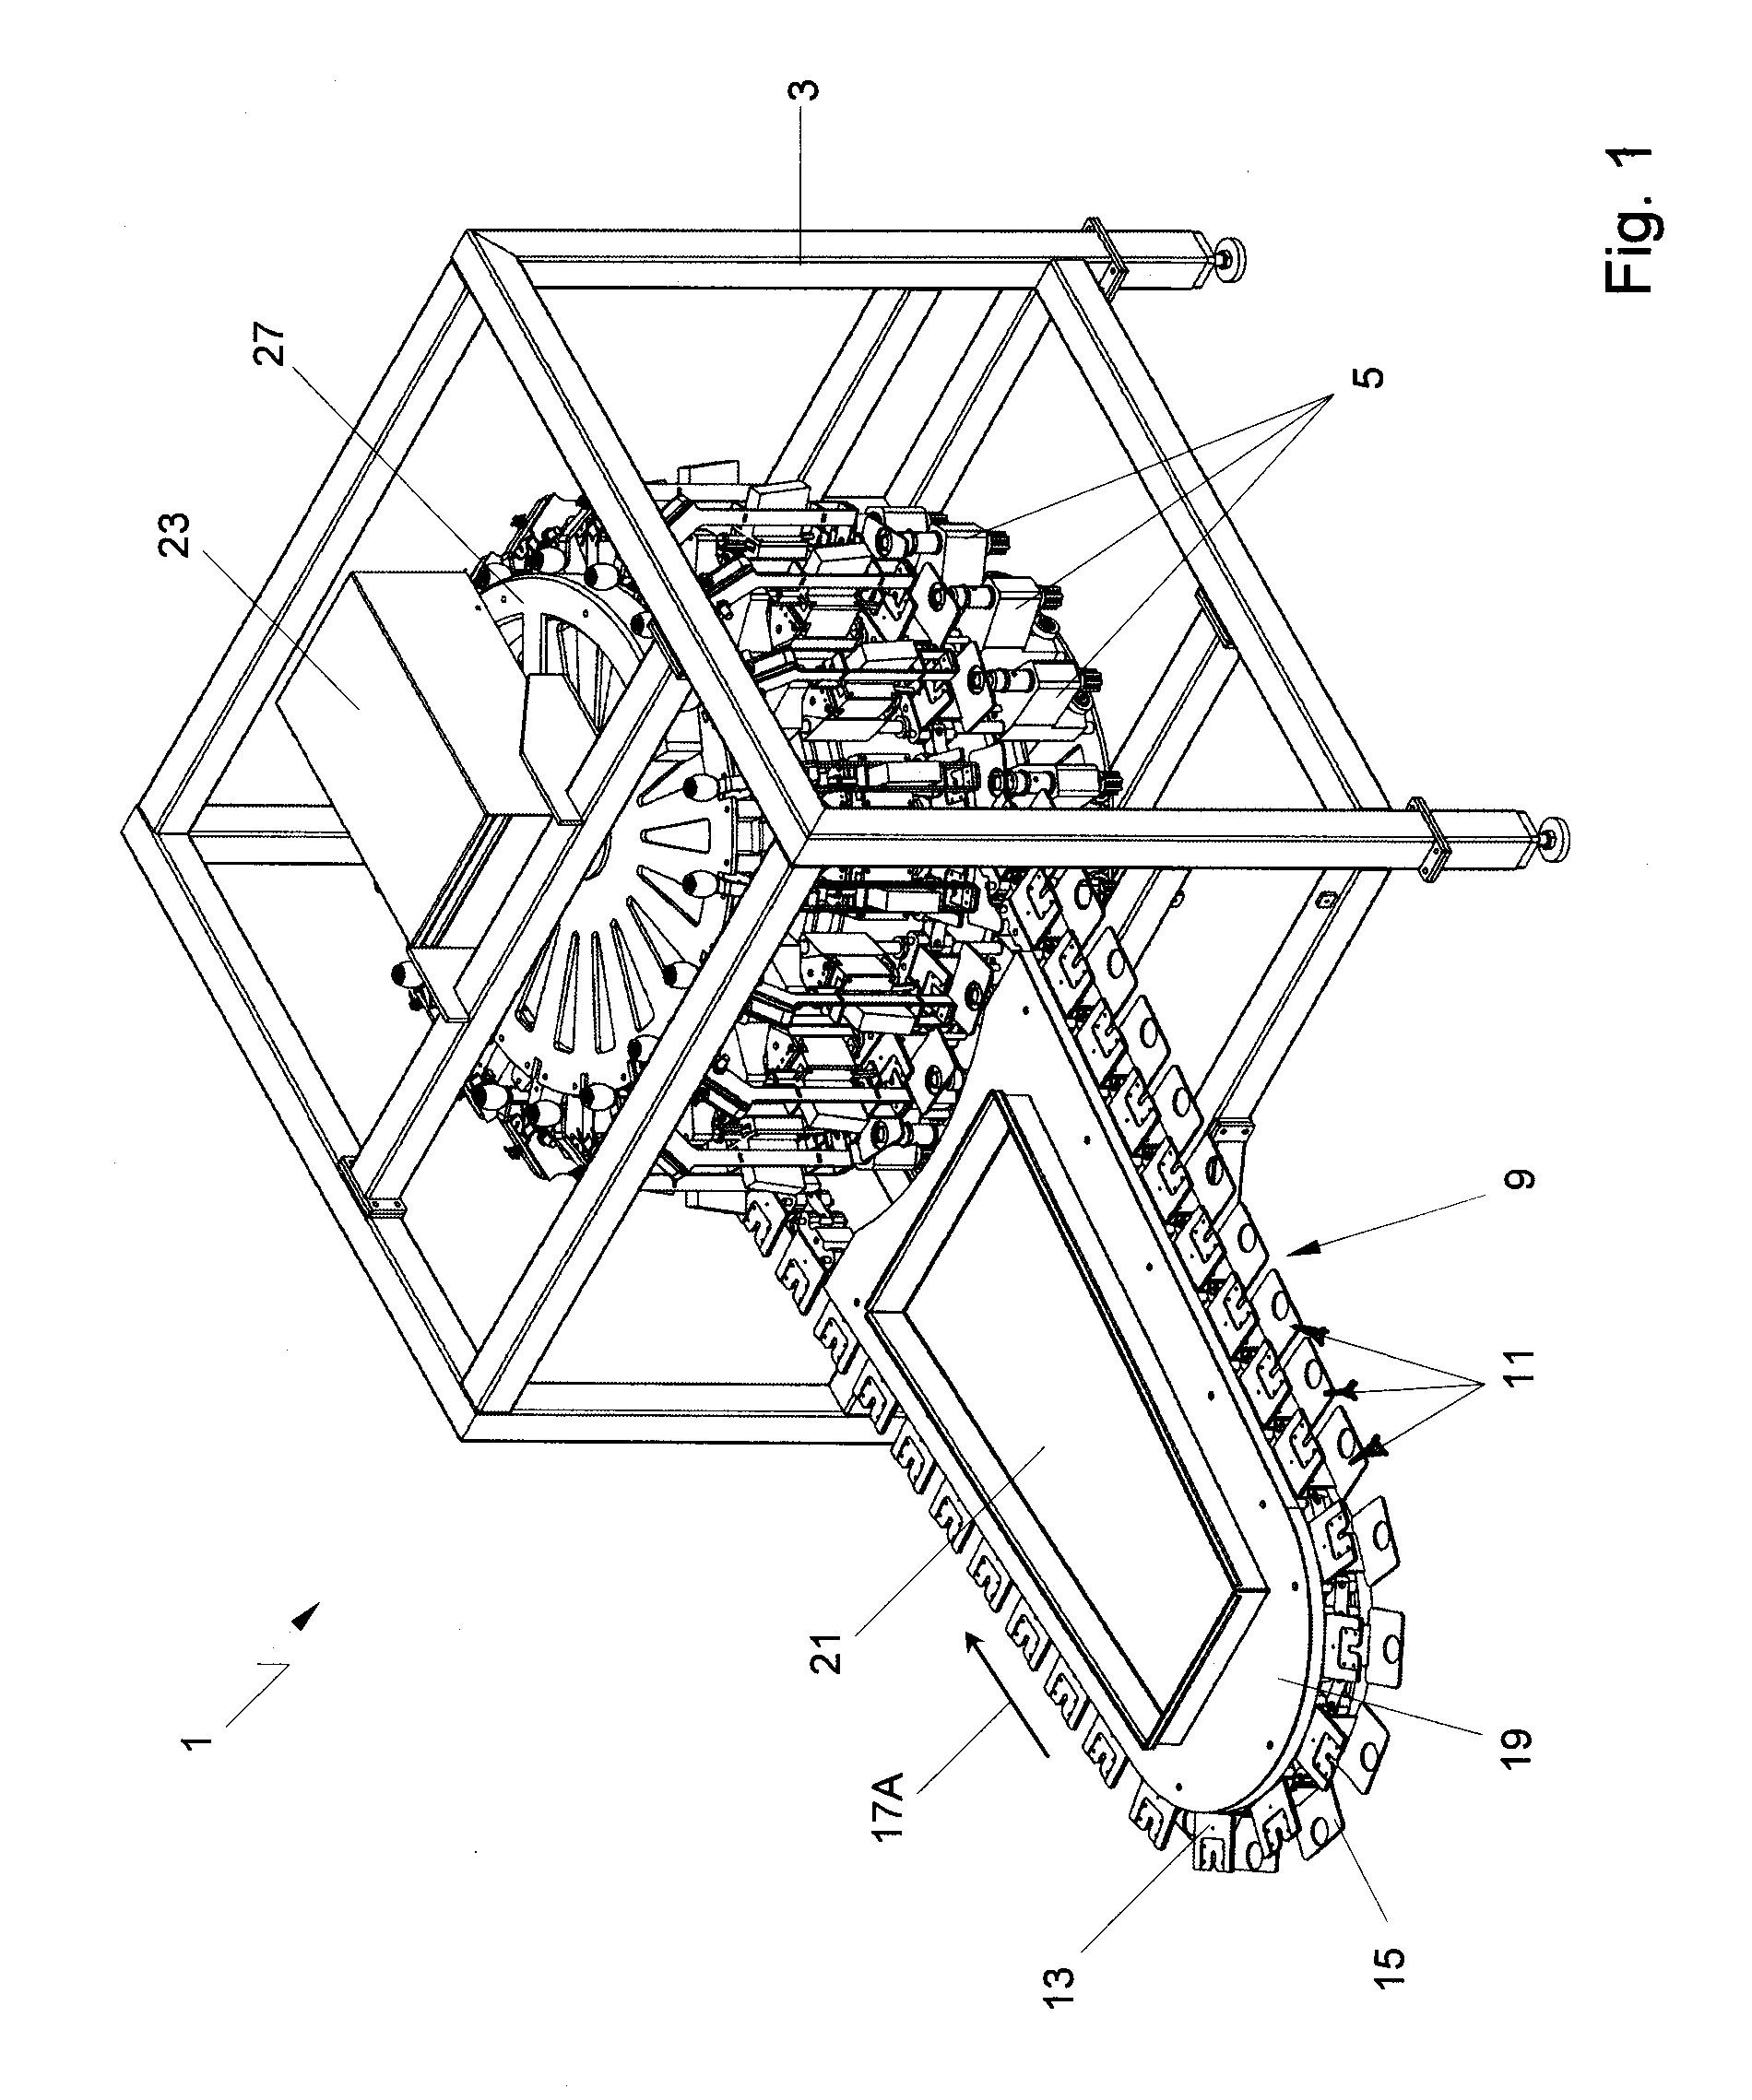 Method and Apparatus for Removing a Sleeve of Meat from an Animal Part Having Bone with Knuckles on Each of its Opposite Ends